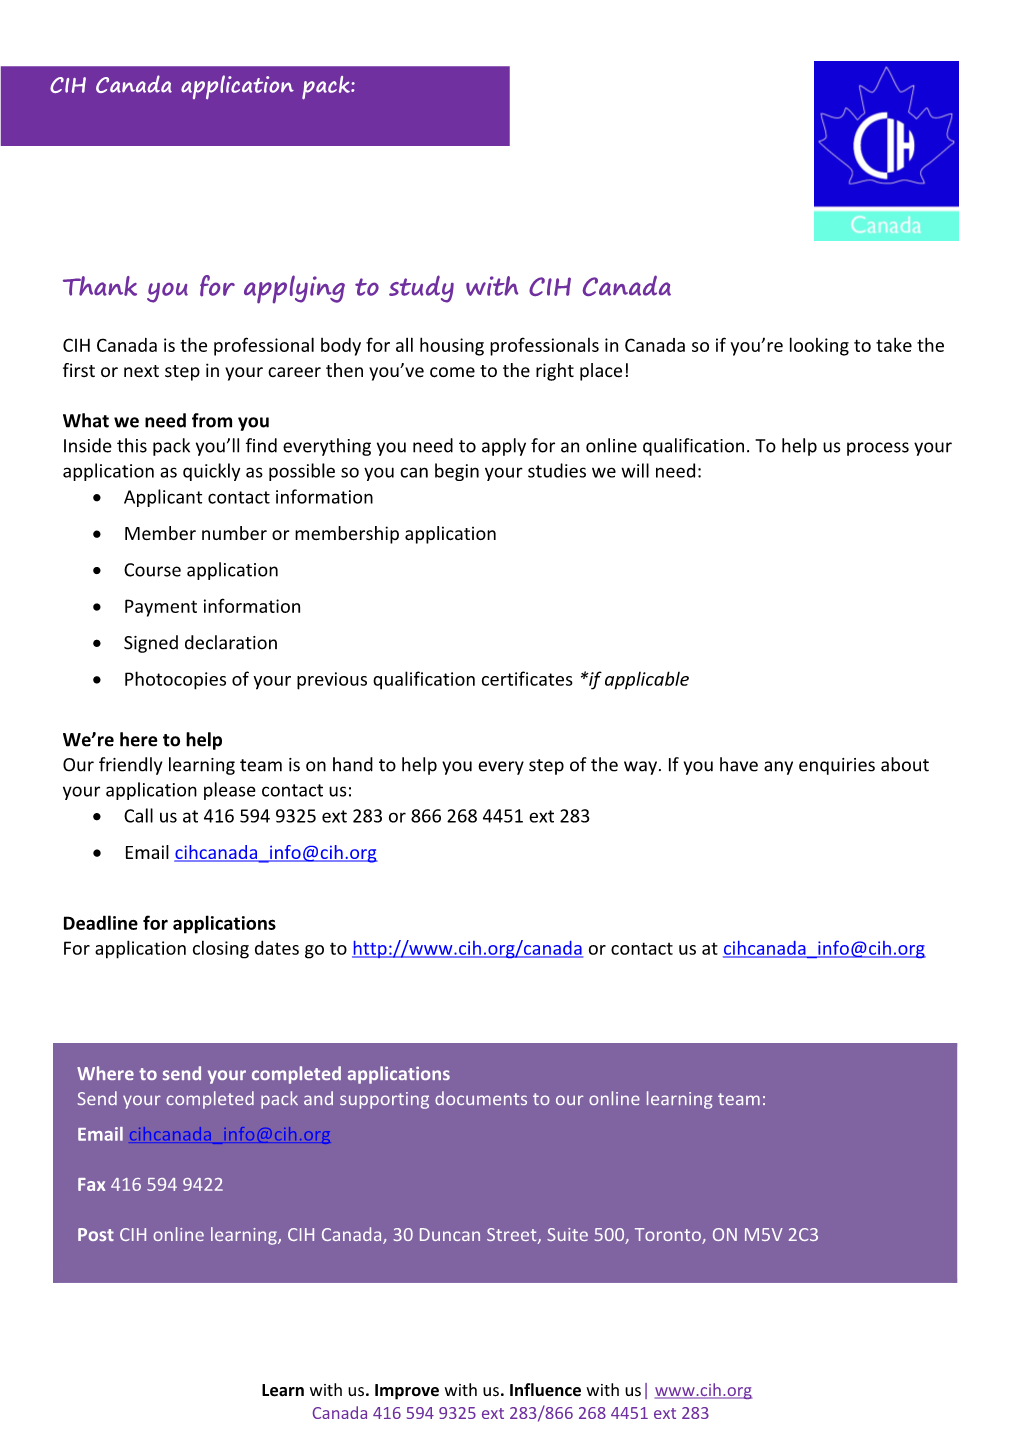 Thank You for Applying to Study with CIH Canada